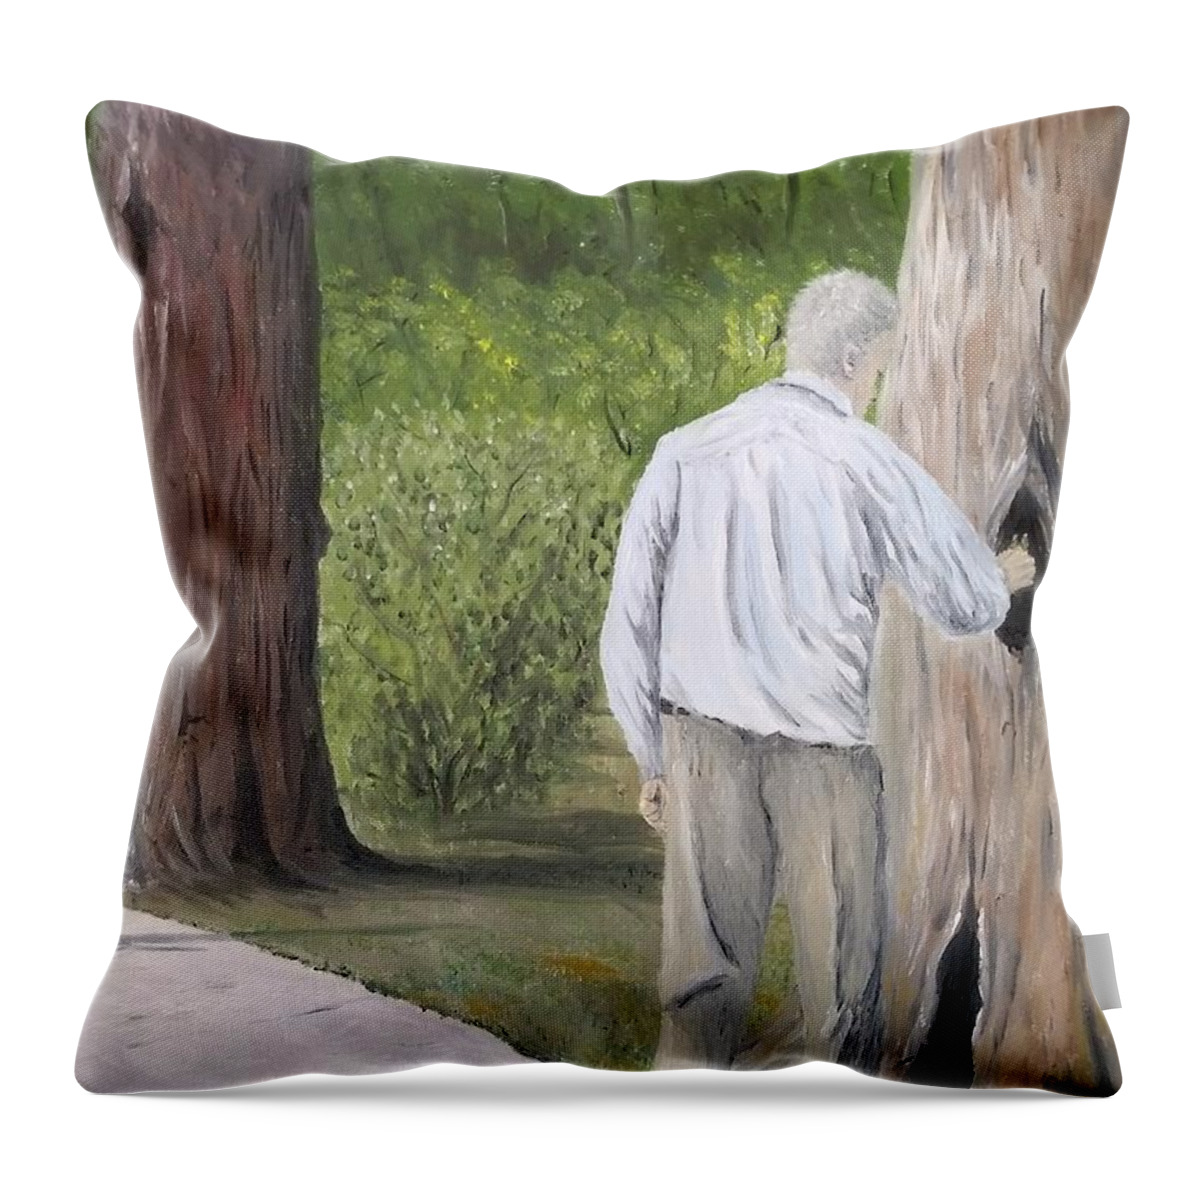 Figurative Throw Pillow featuring the painting Boo by Kevin Daly